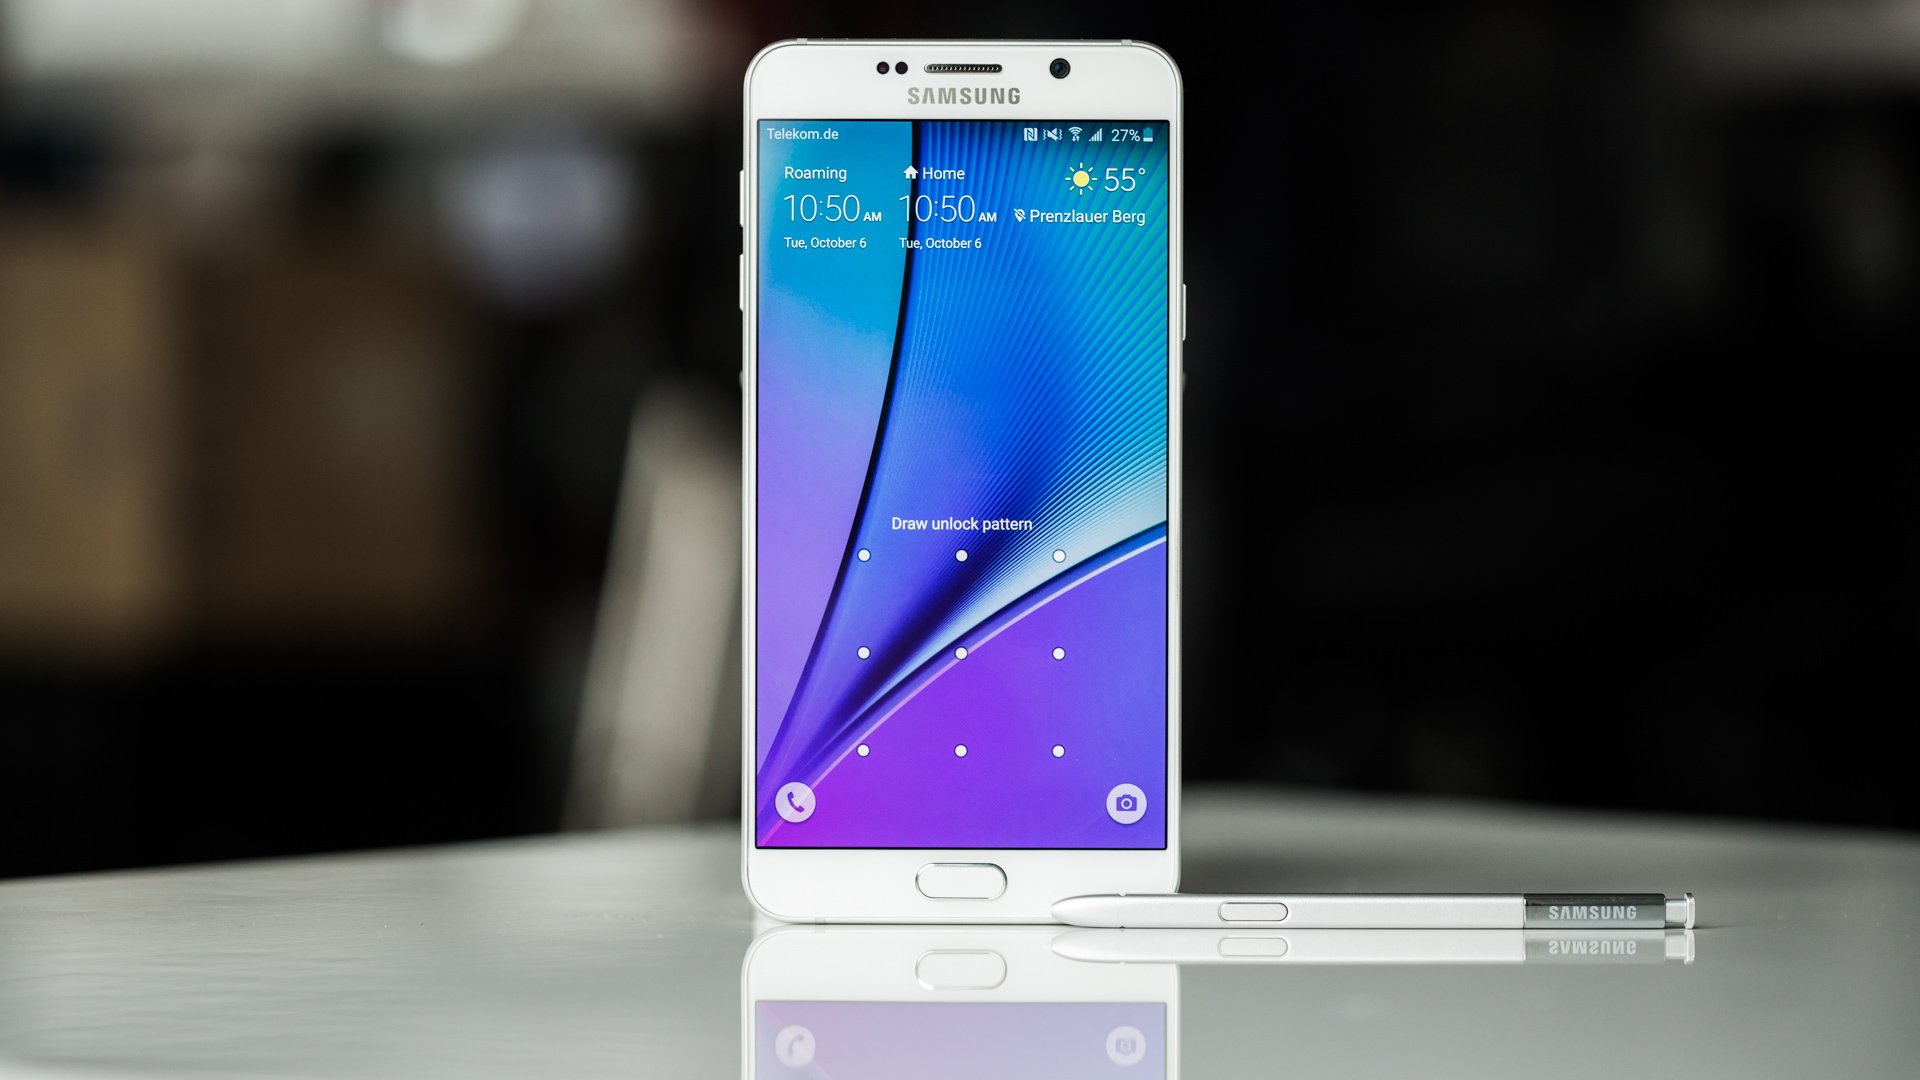 Download Galaxy Note 5 Wallpapers and Ringtones